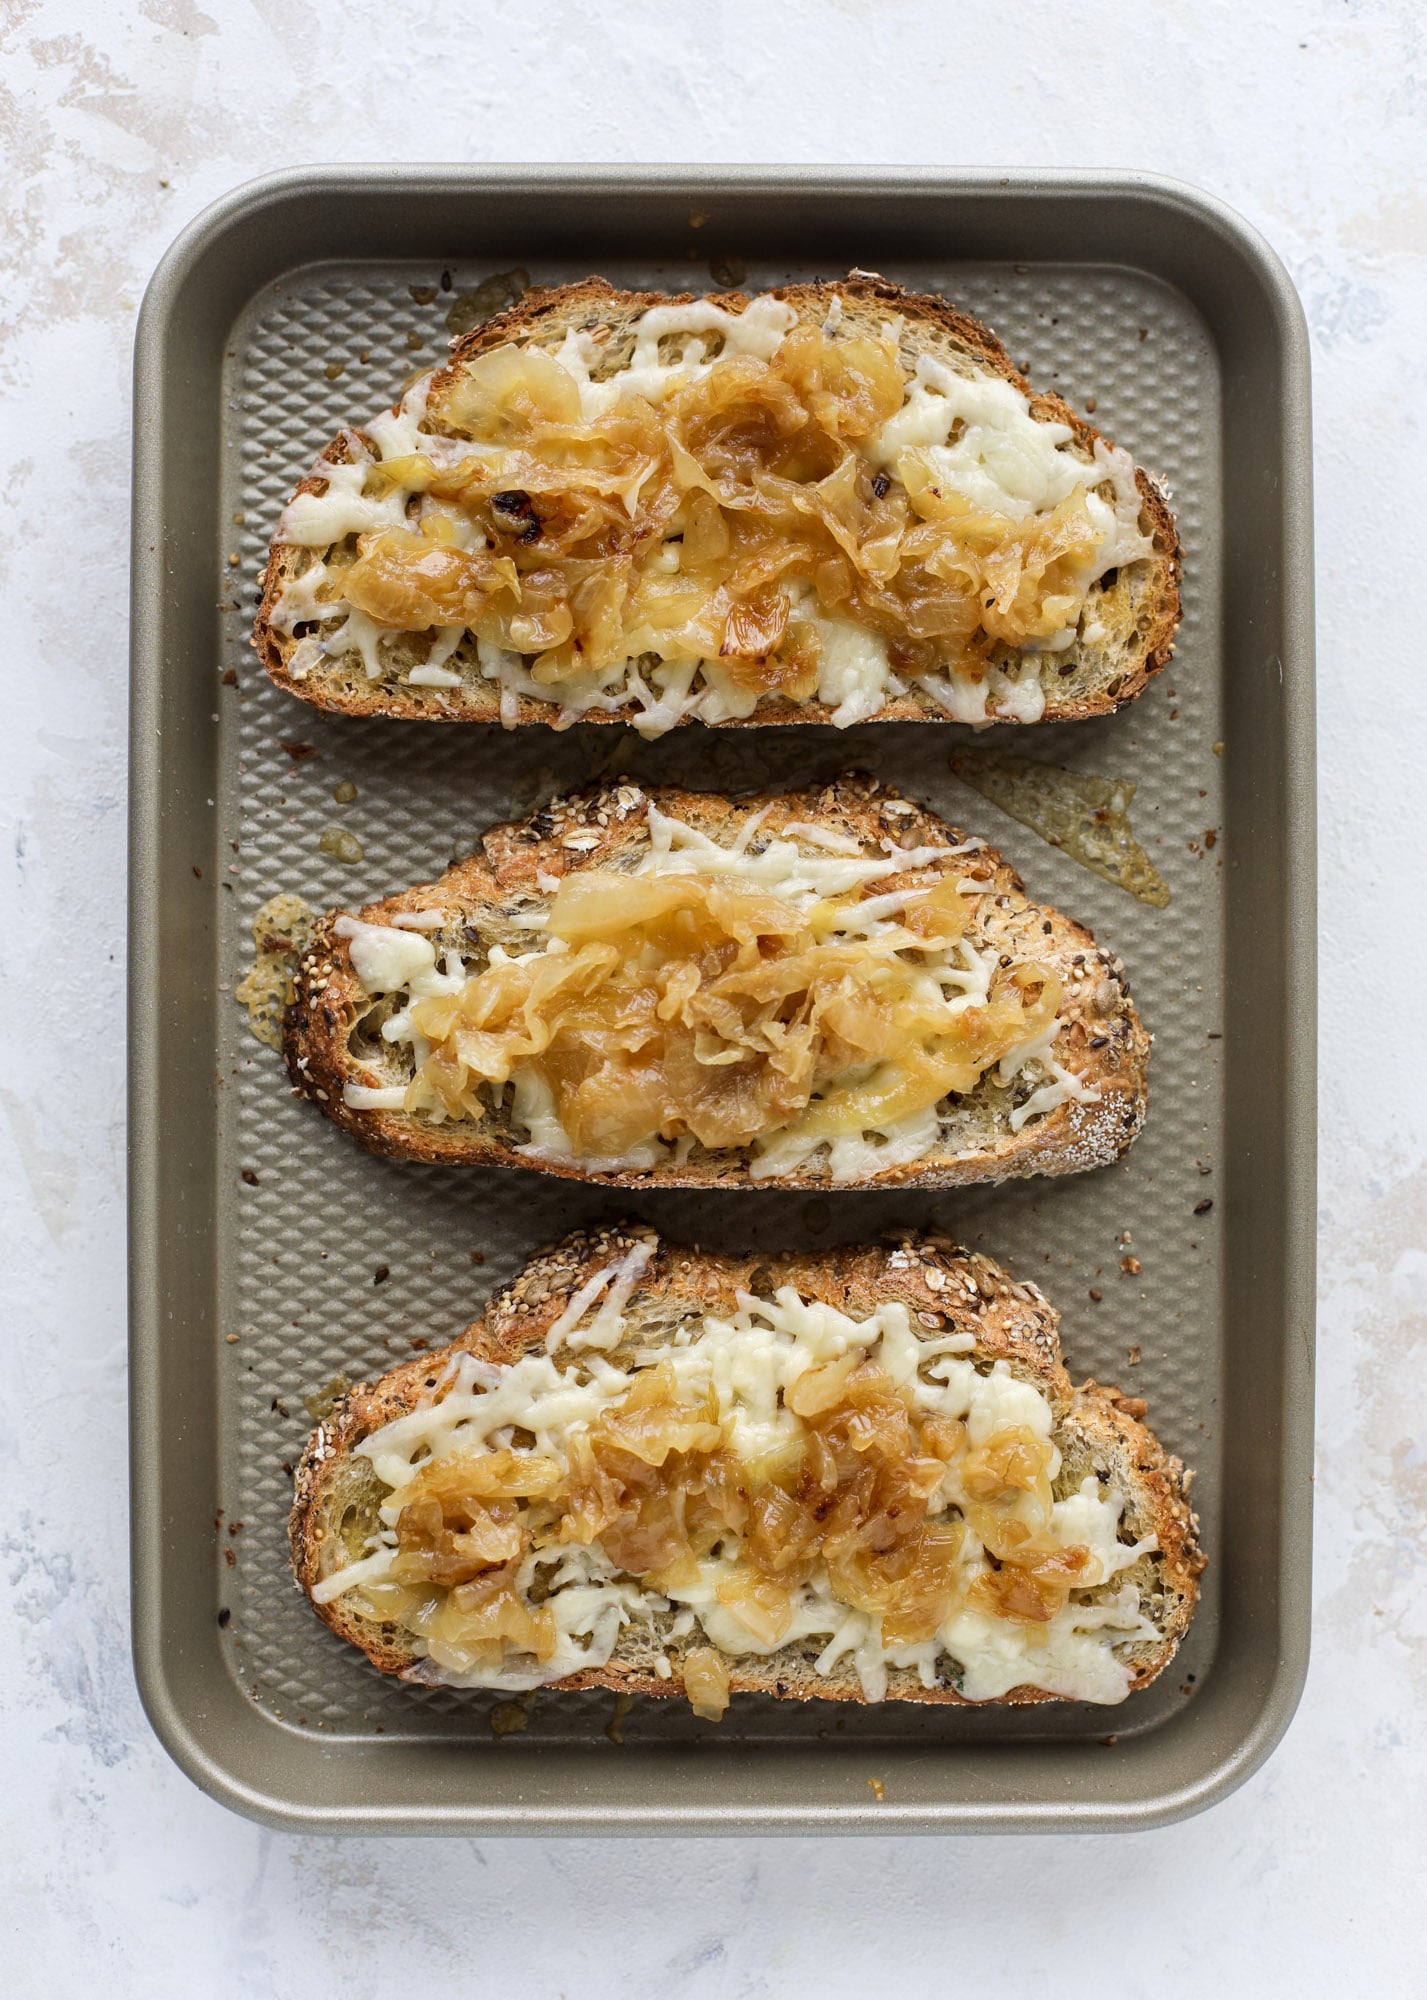 Crispy brussels sprouts toast begins with sourdough bread, melty havarti cheese and caramelized onions. It's high-maintenance toast in the best way possible. I howsweeteats.com